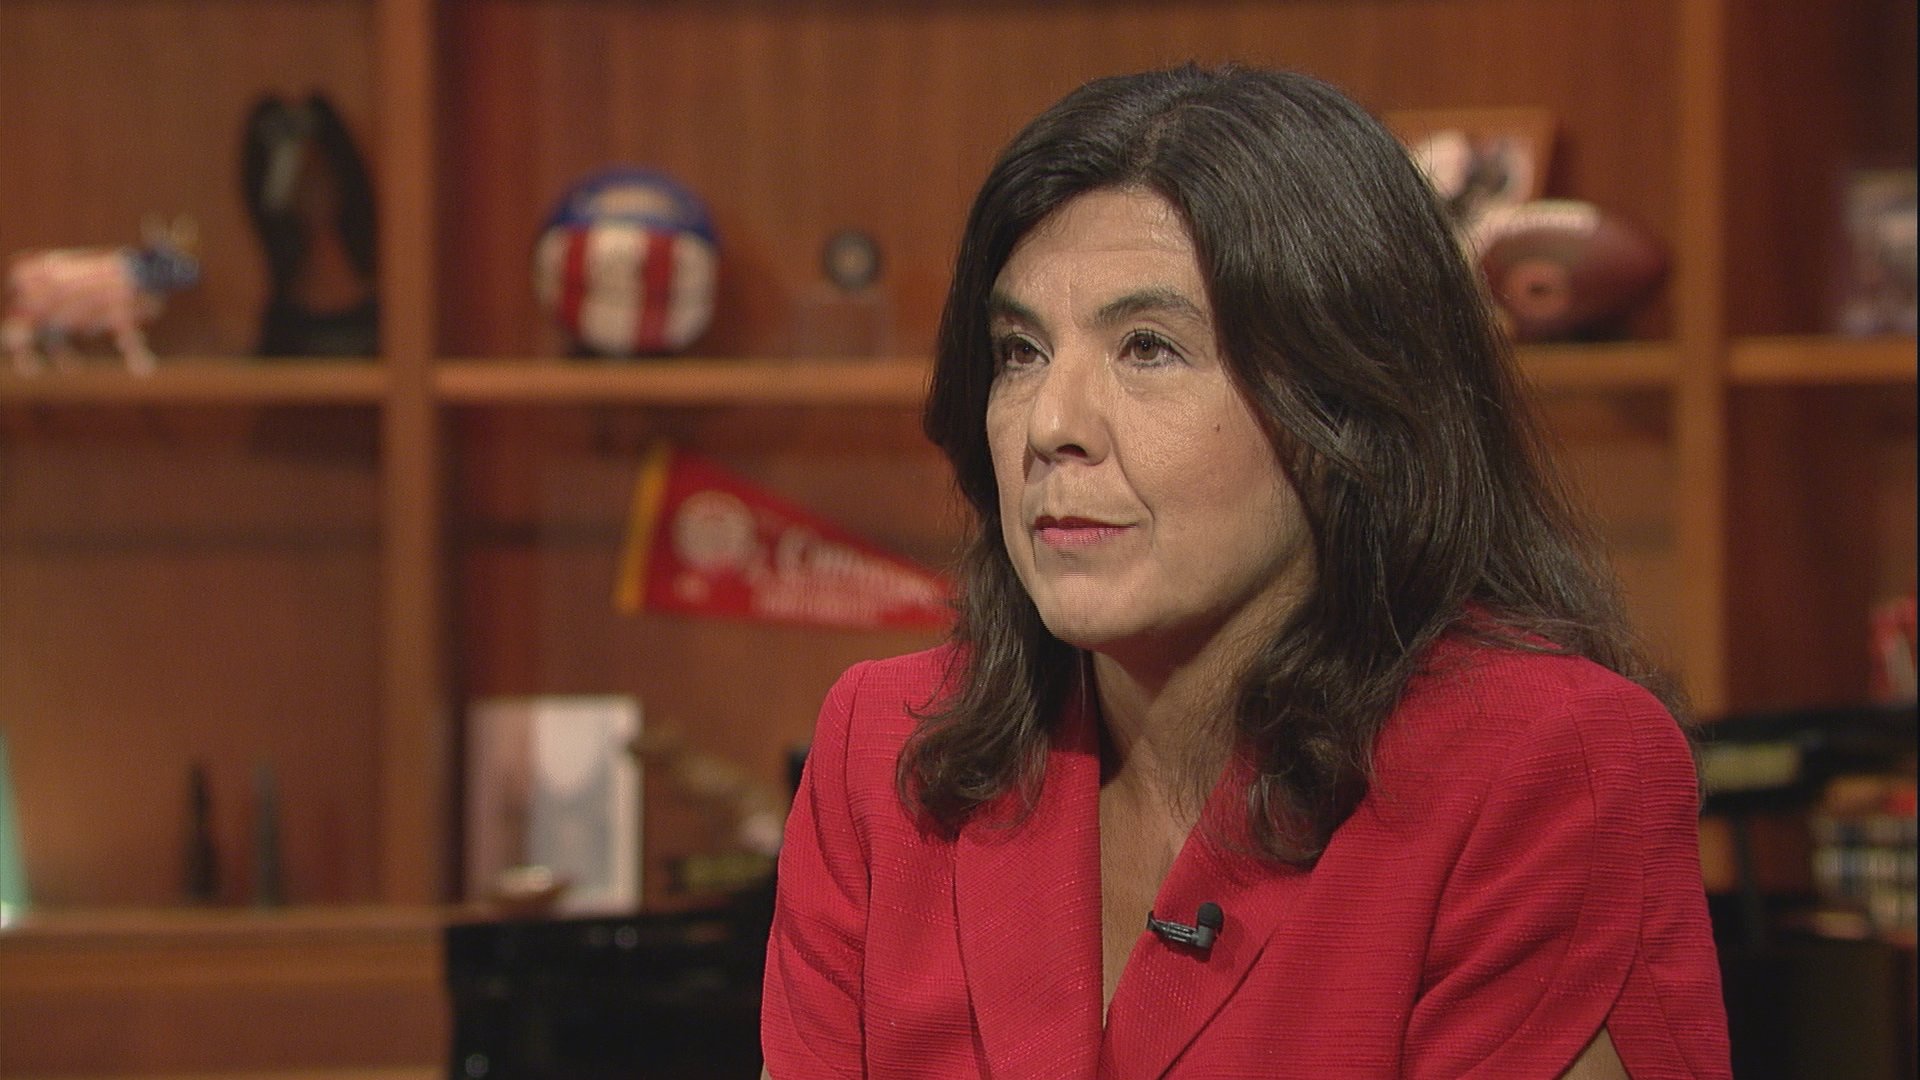 Former Cook County State’s Attorney Anita Alvarez appears on “Chicago Tonight” on Sept. 8, 2016.